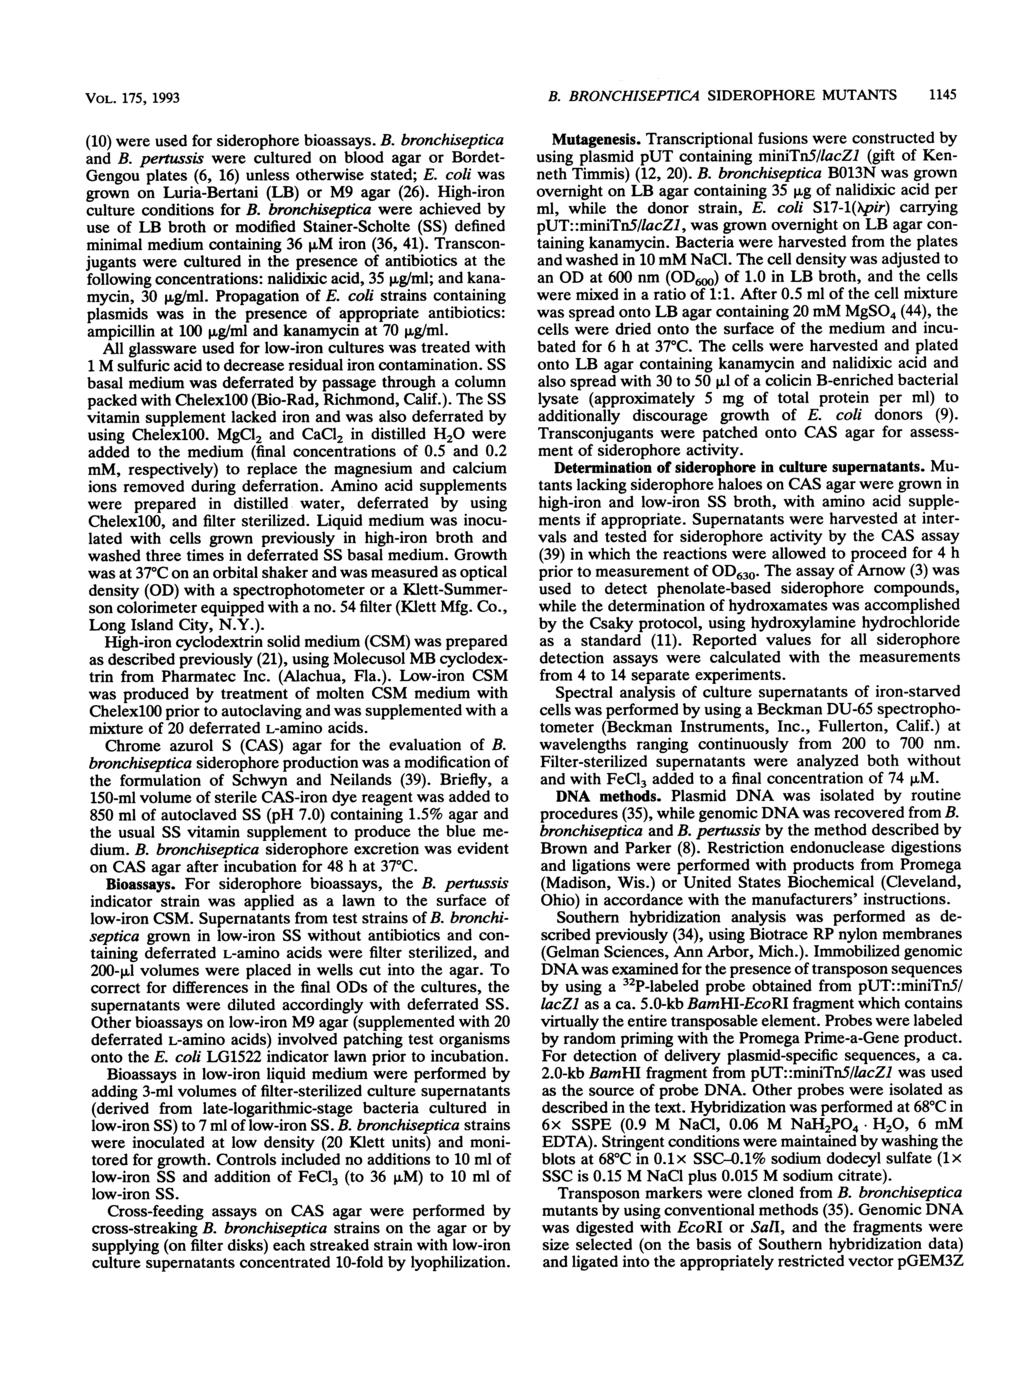 VOL. 175, 1993 (10) were used for siderophore bioassays. B. bronchiseptica and B. pertussis were cultured on blood agar or Bordet- Gengou plates (6, 16) unless otherwise stated; E.